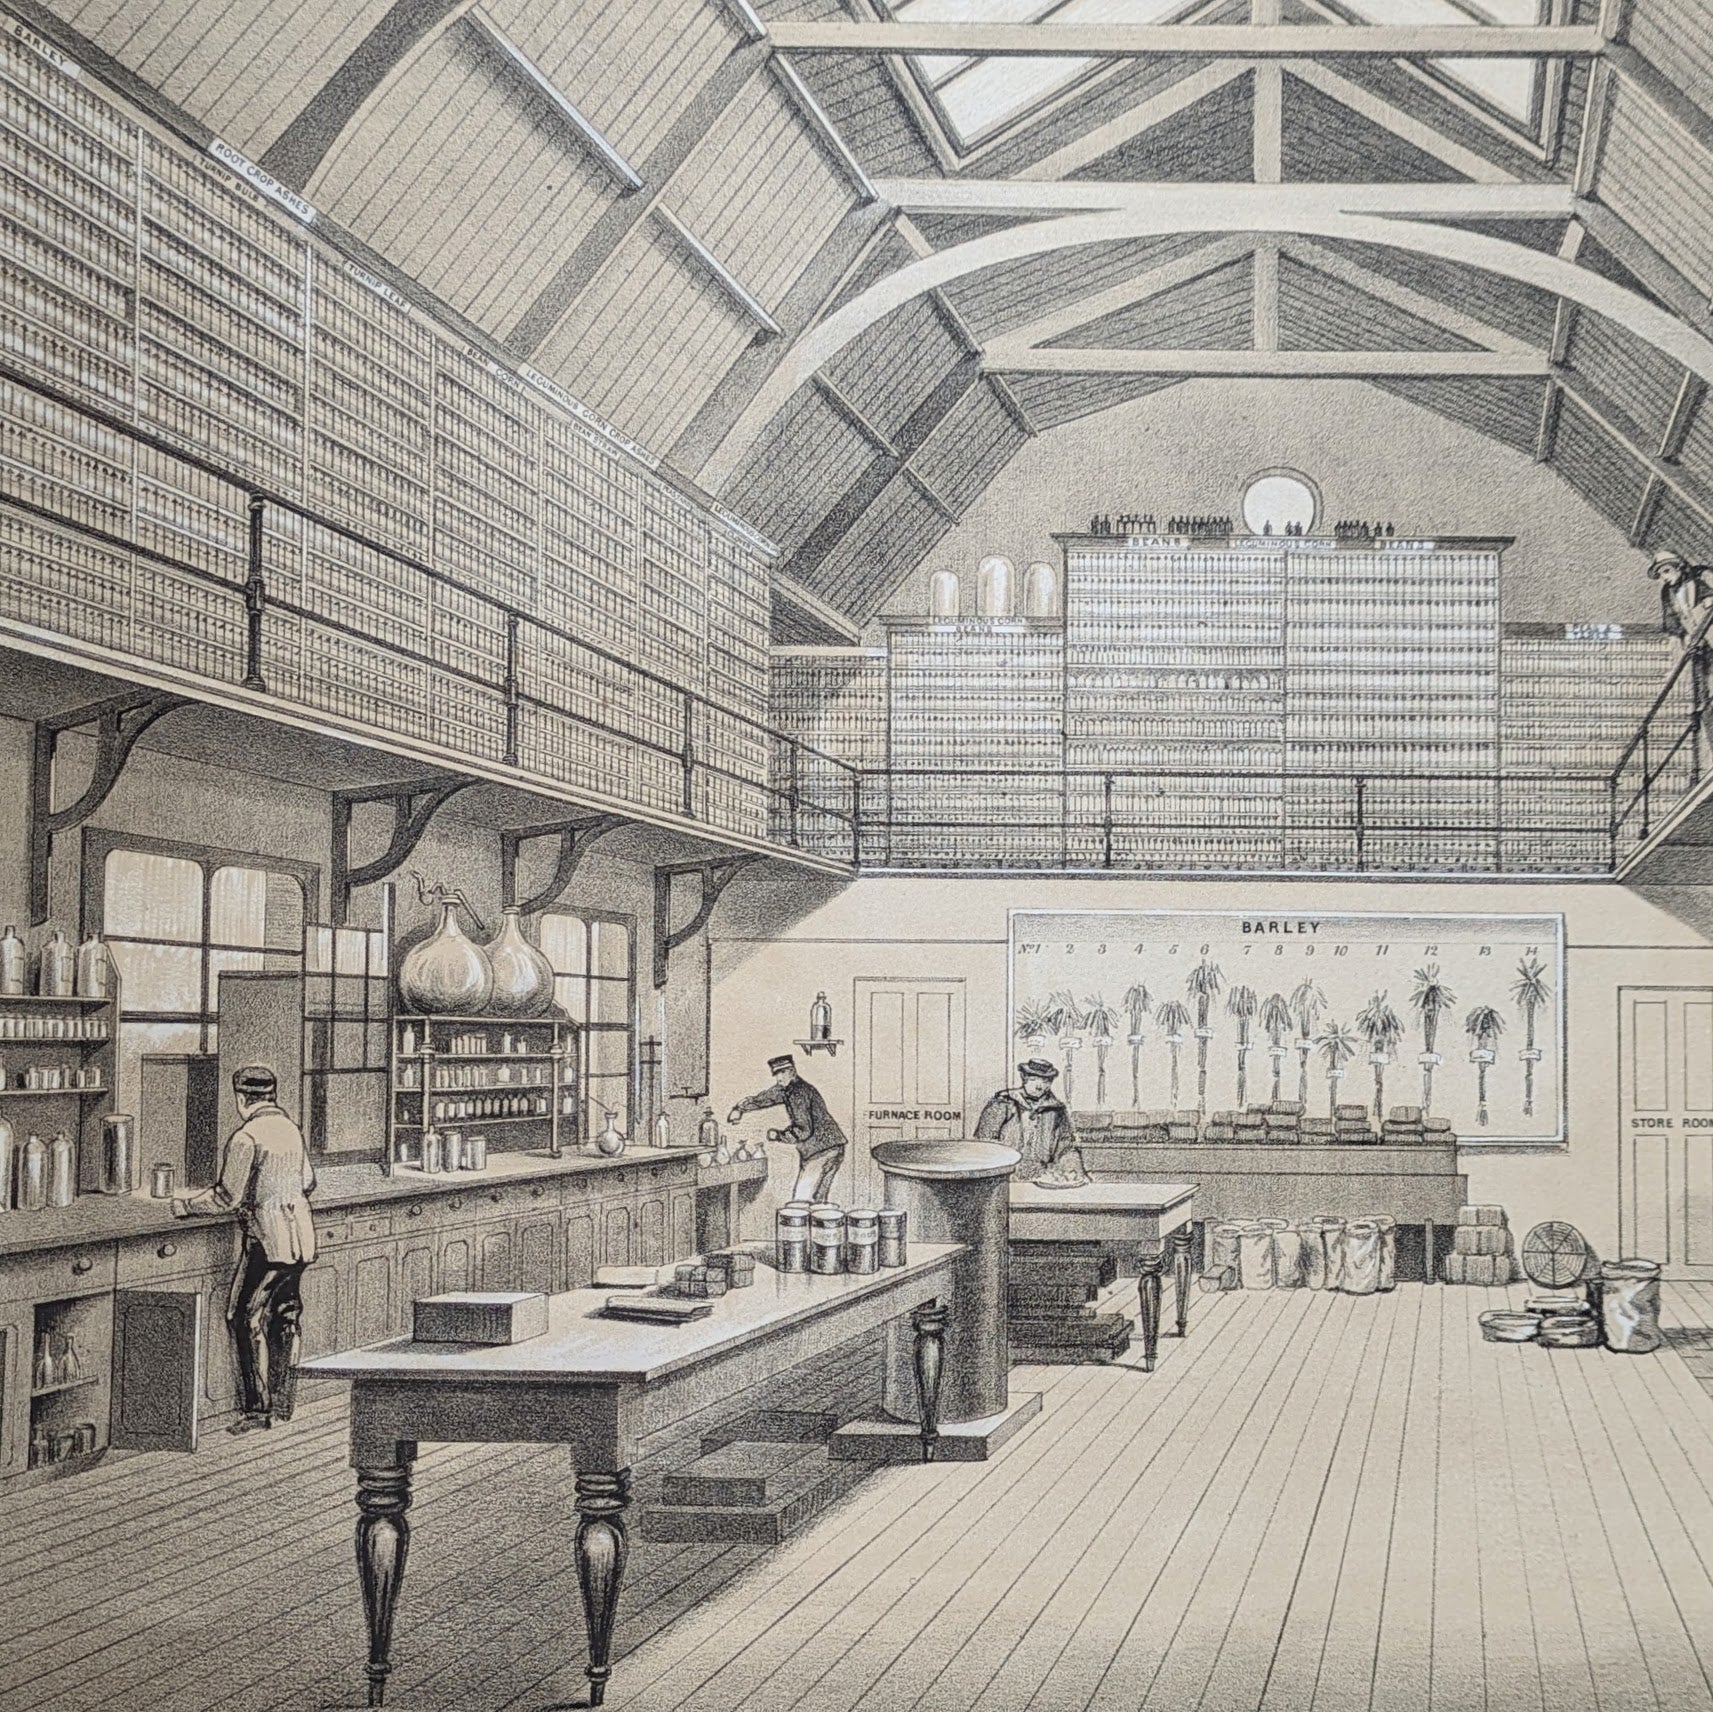 [Rothamsted Experimental Station] | Drawings and Plans of the Lawes Testimonial Laboratory